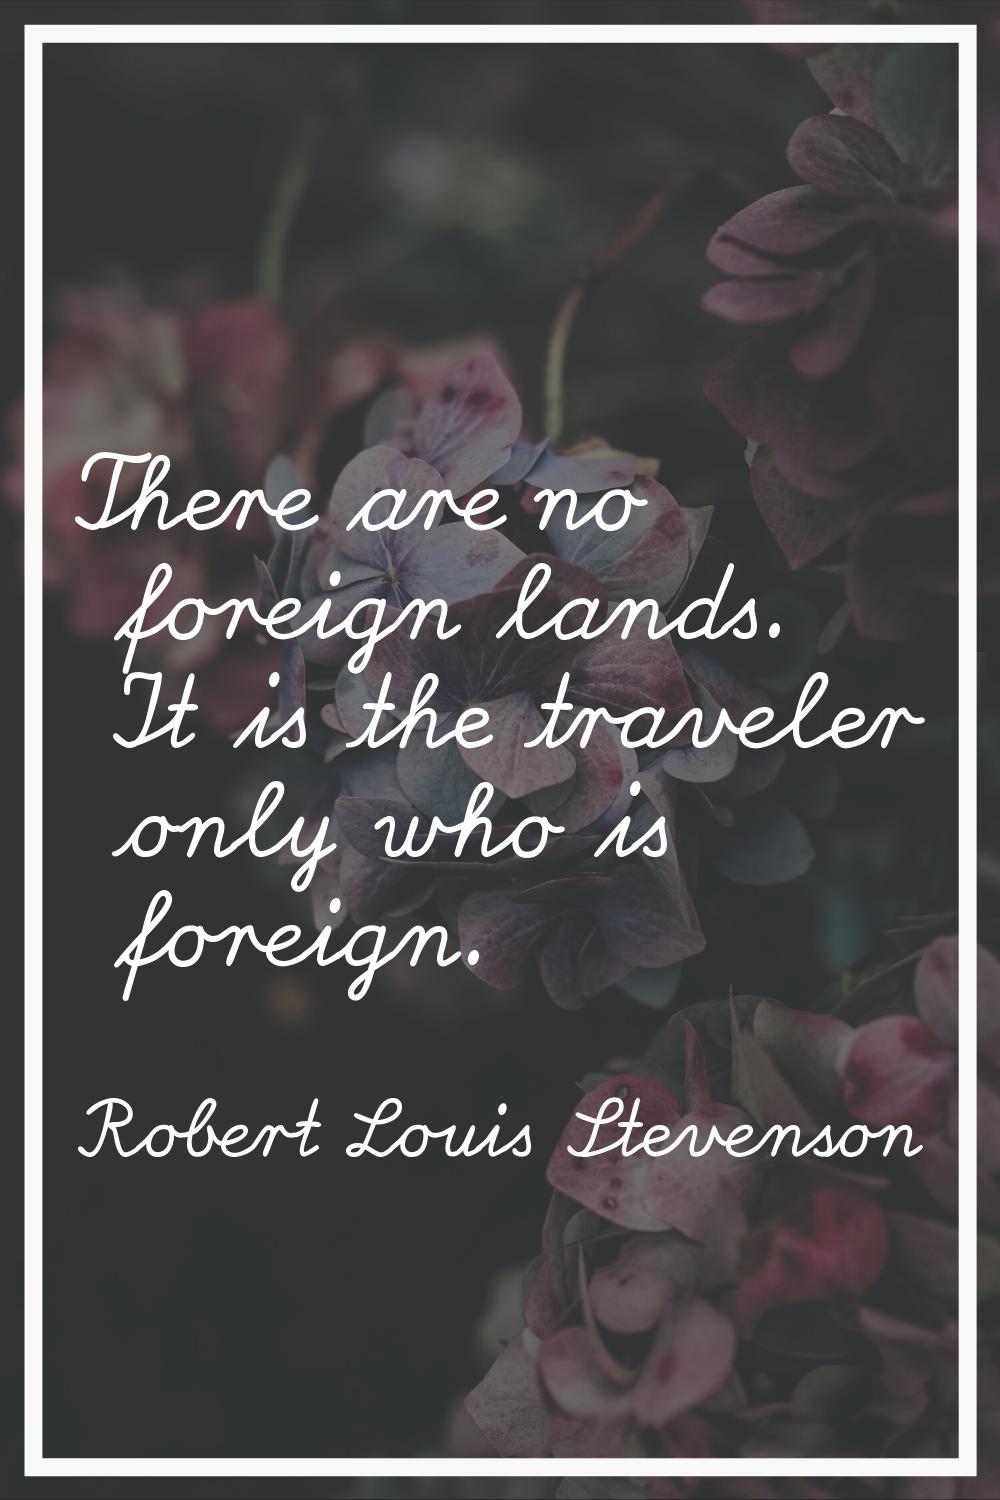 There are no foreign lands. It is the traveler only who is foreign.